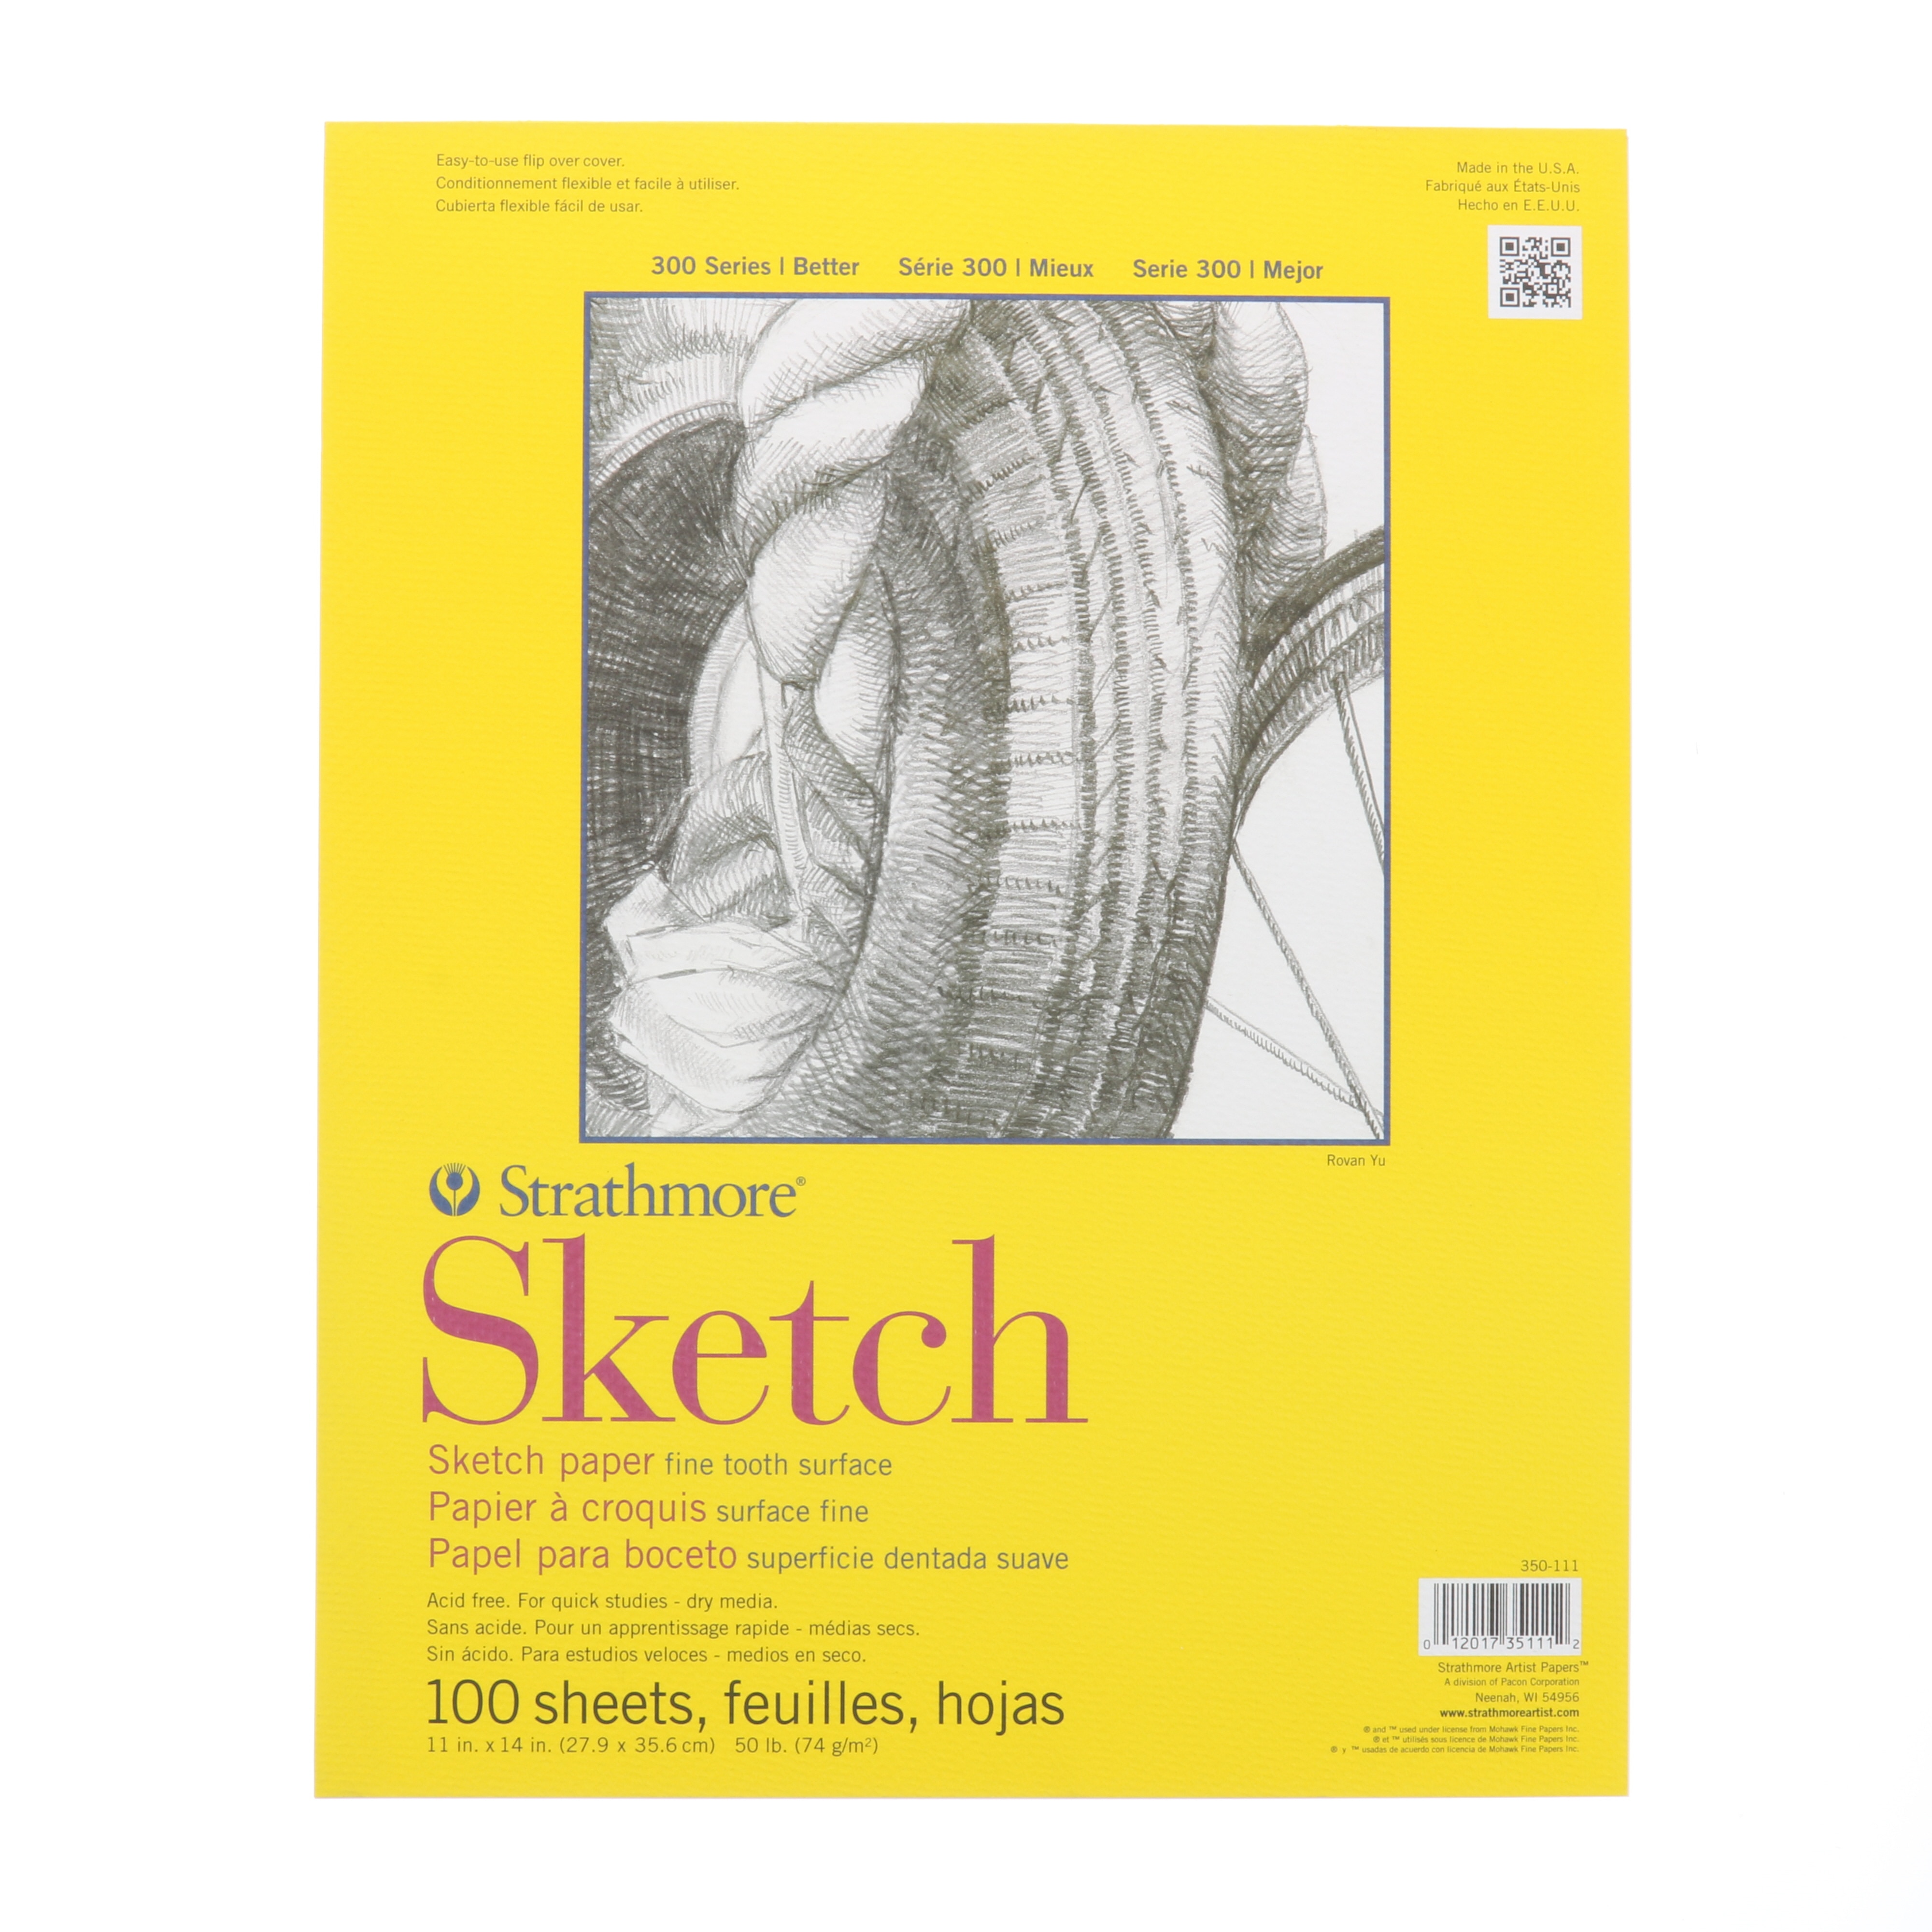 Strathmore Sketch Paper Pad, 300 Series, Tape-Bound, 11" x 14"", 100 Sheets